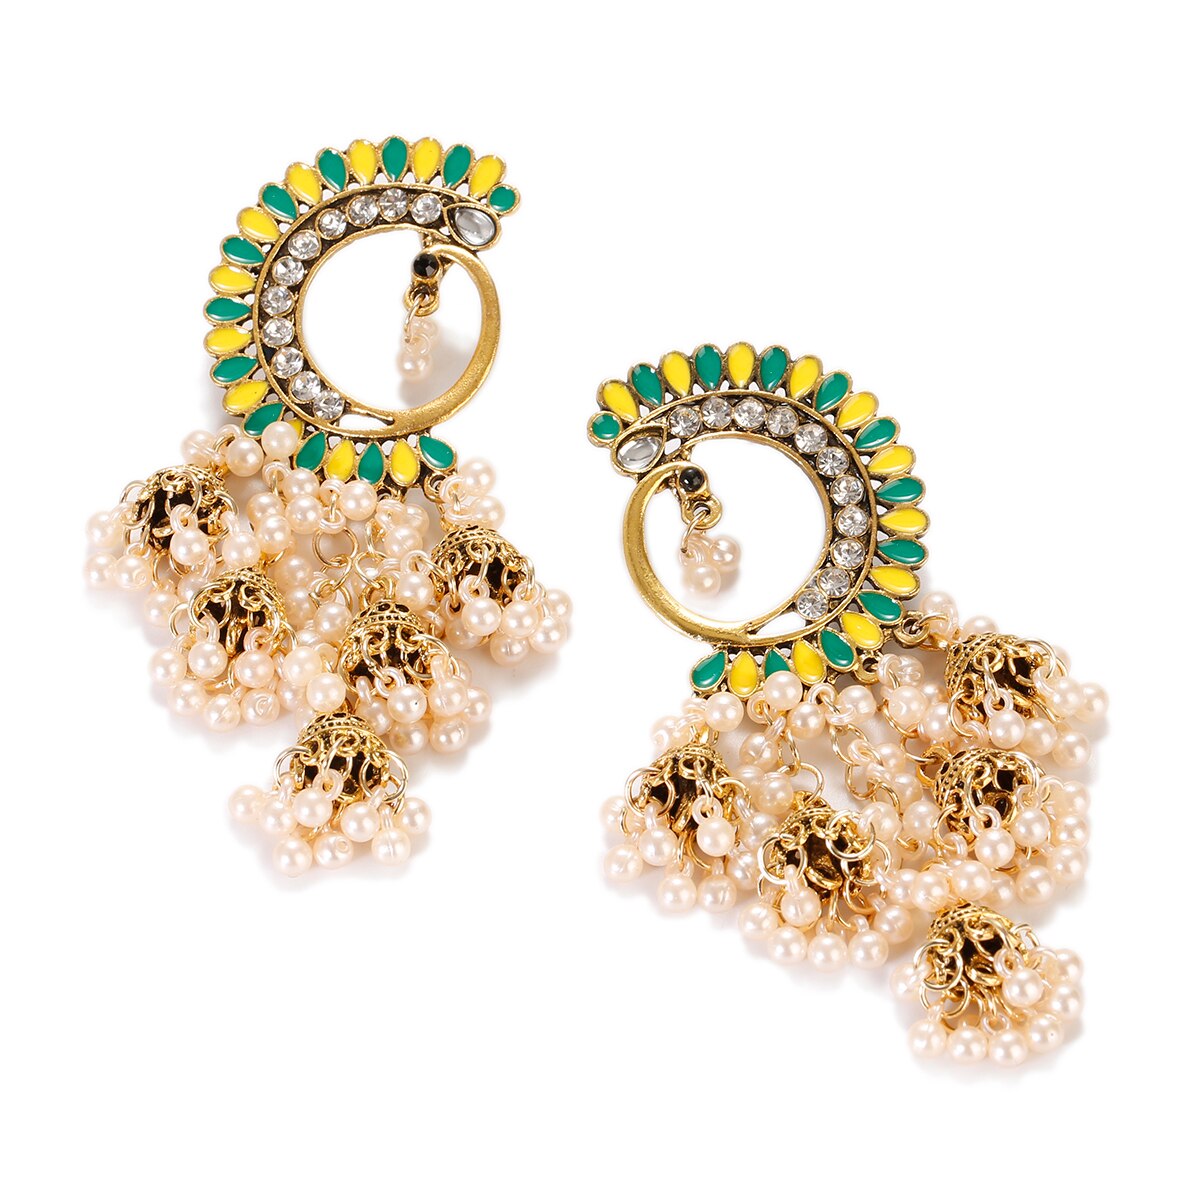 Afghan-Indian-Jewelry-Jhumka-Earrings-For-Women-Gypsy-Gold-Color-Dripping-Oil-Flower-Earrings-Fashio-1005003803870351-4